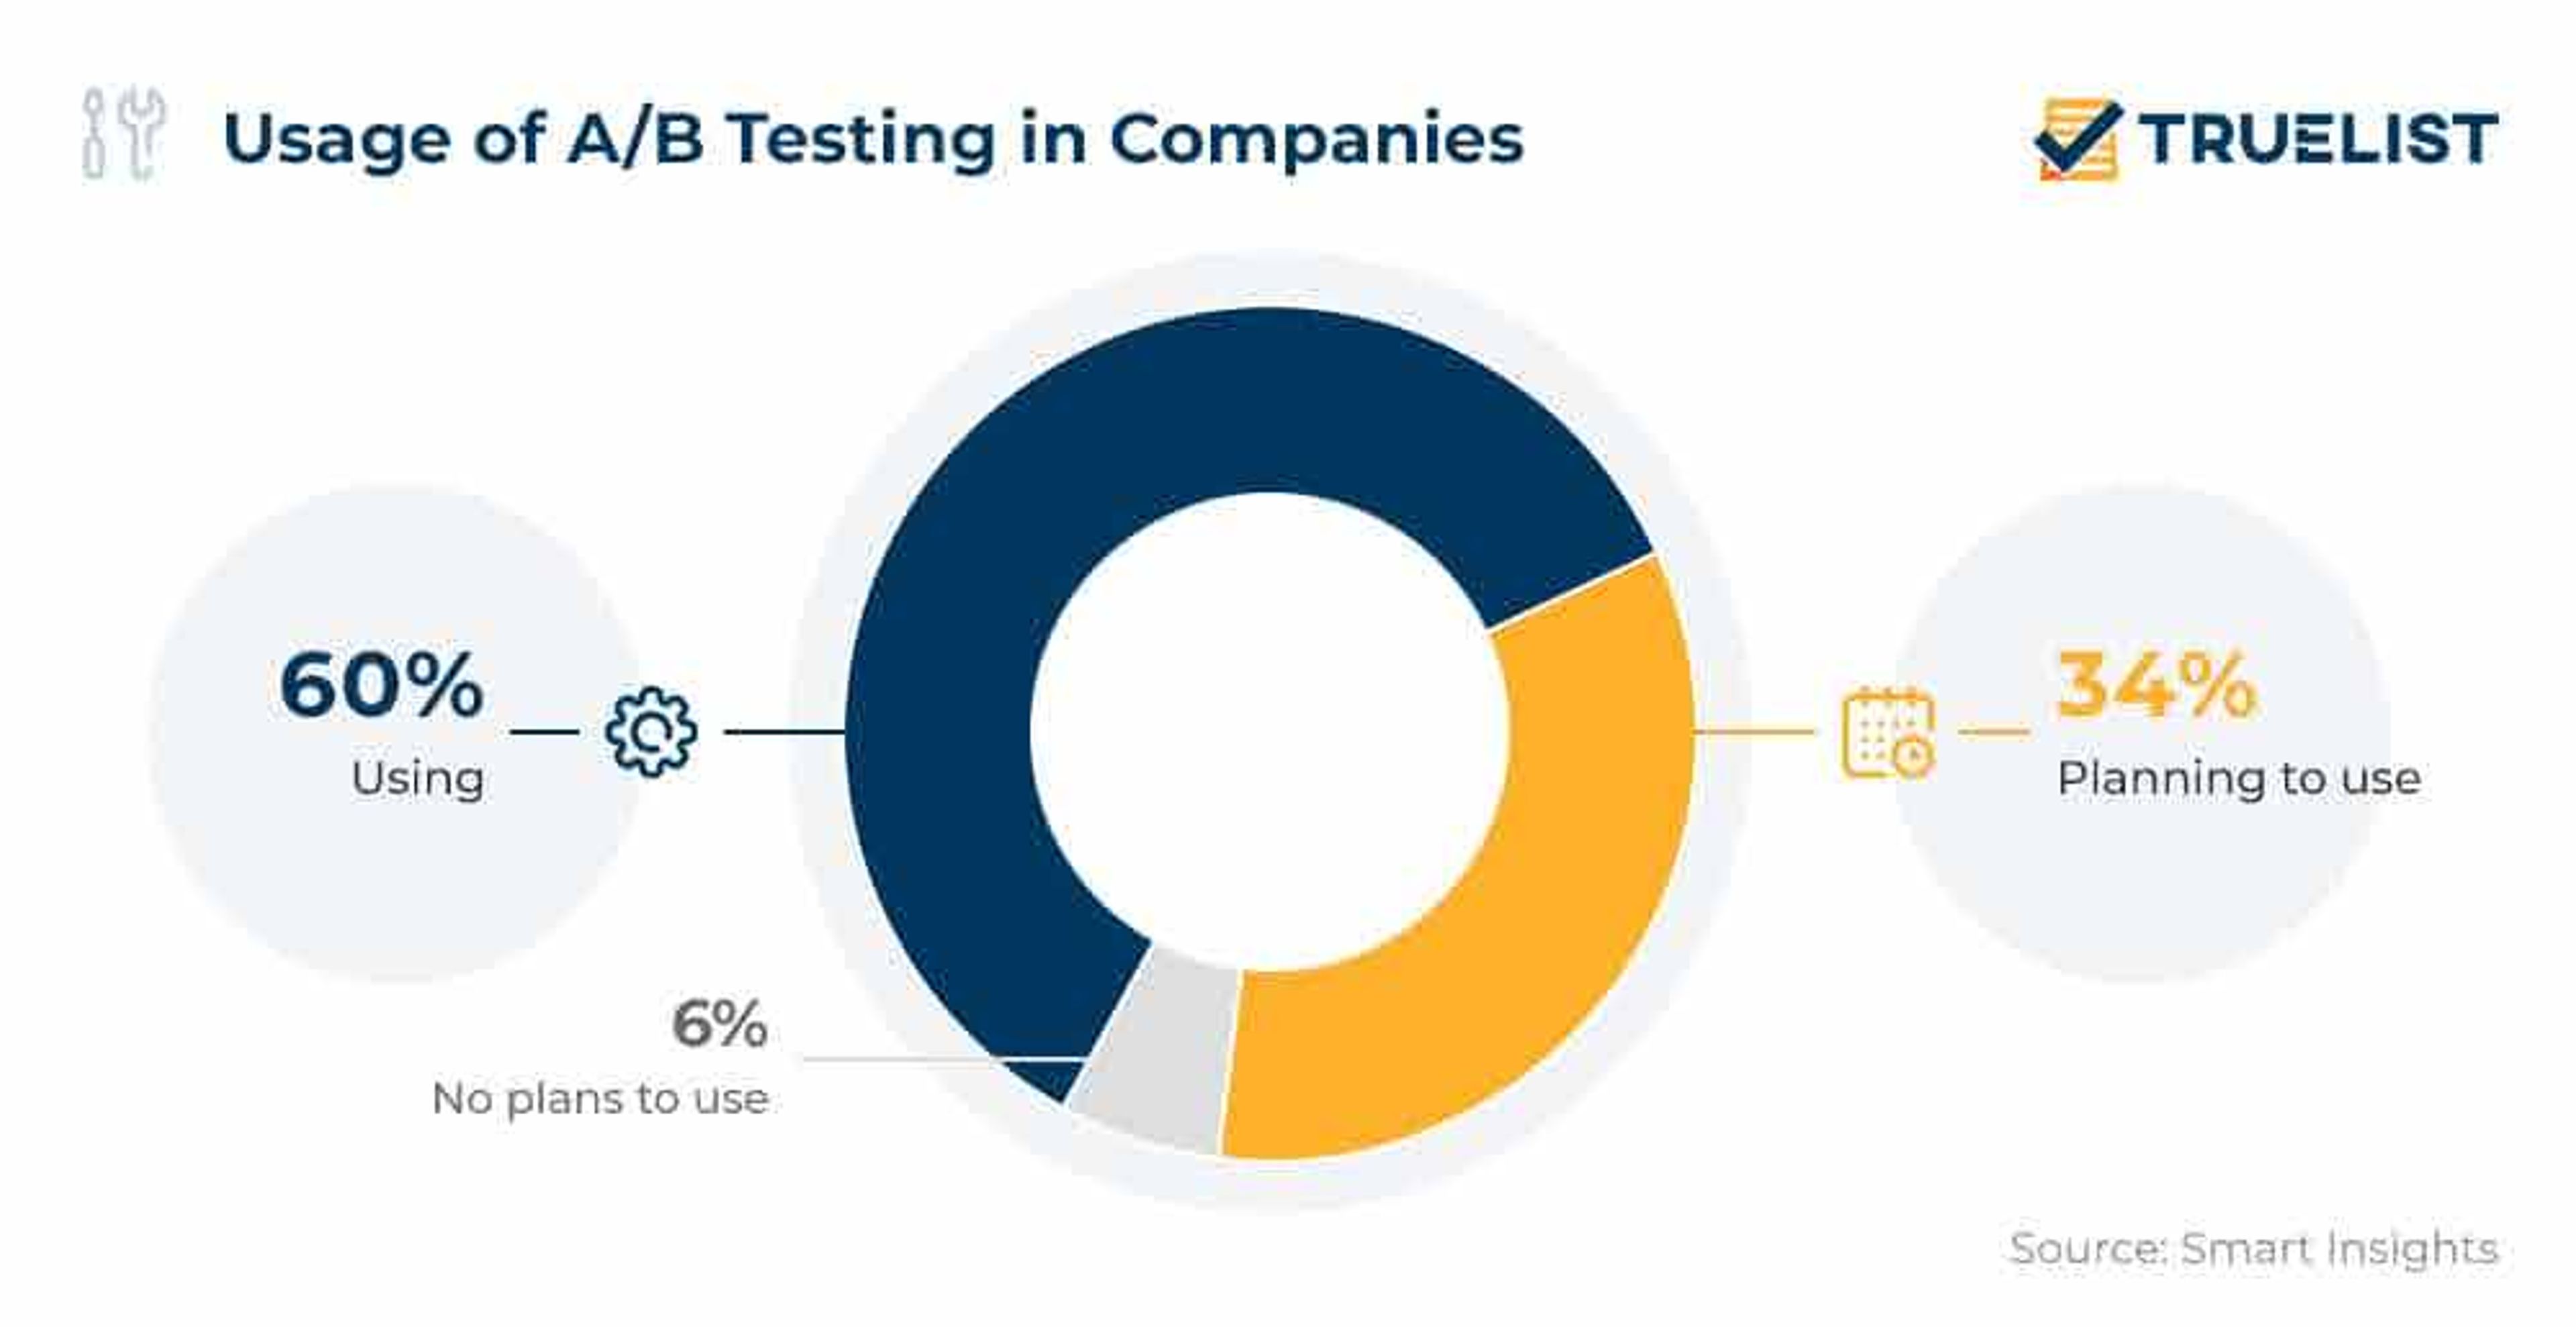 Usage of A/B testing in companies diagram